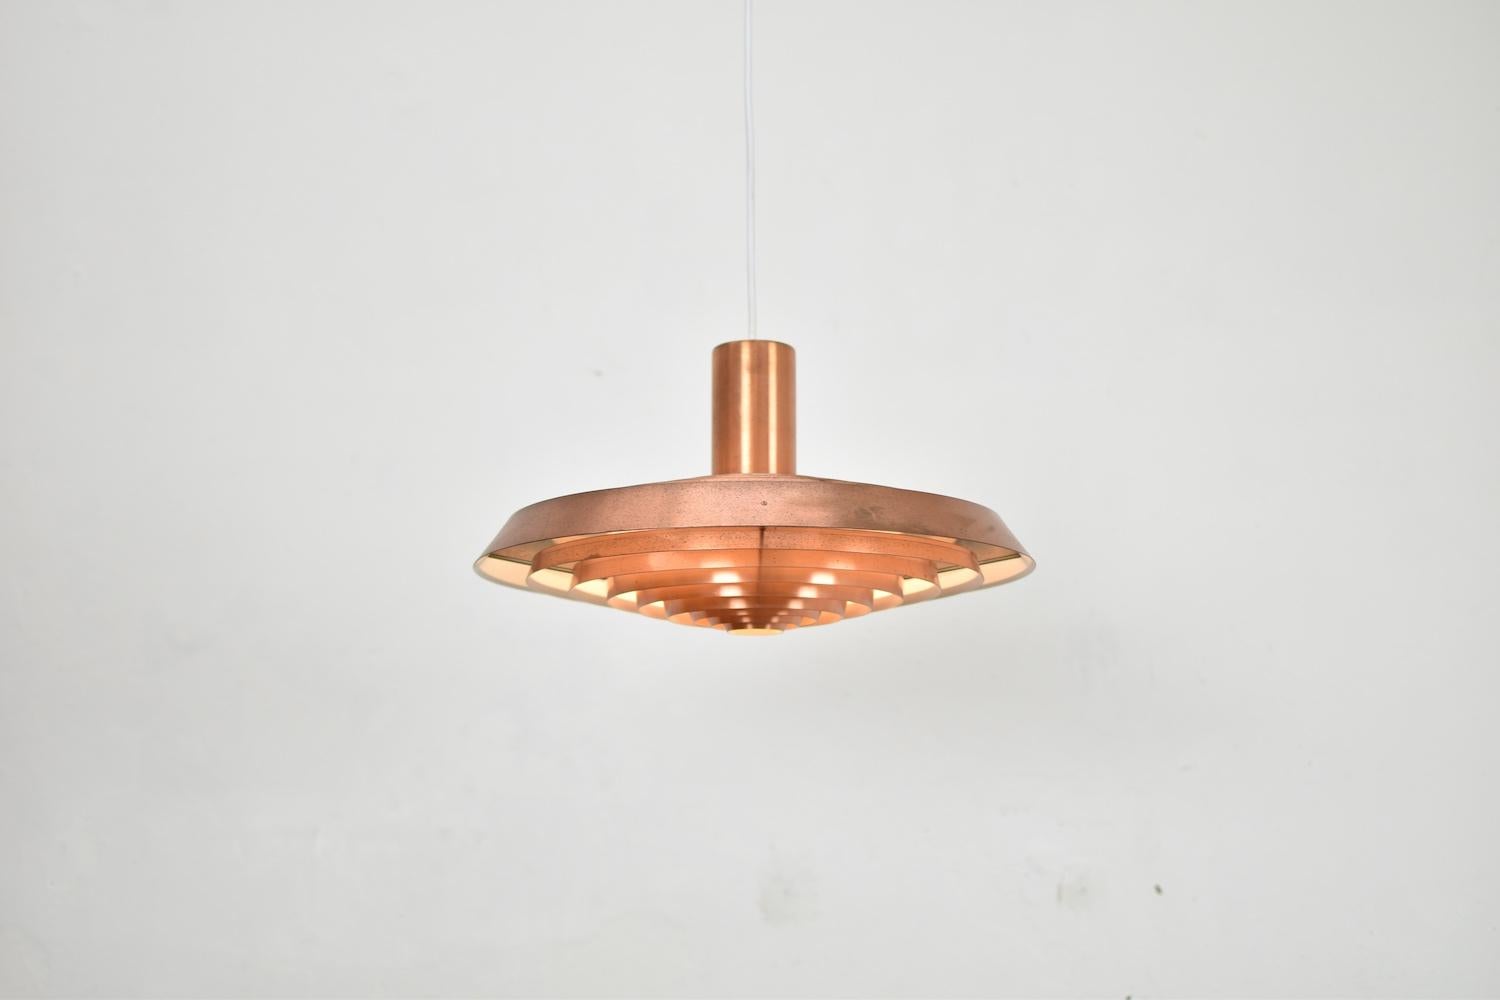 Proud to present you this rare PH Langelinie pendant by Poul Henningsen for Louis Poulsen, Denmark, 1950s. This pendant is made out of solid brass and was designed for the Langelinie Pavillion in Copenhagen. The design of this lamp was inspired by